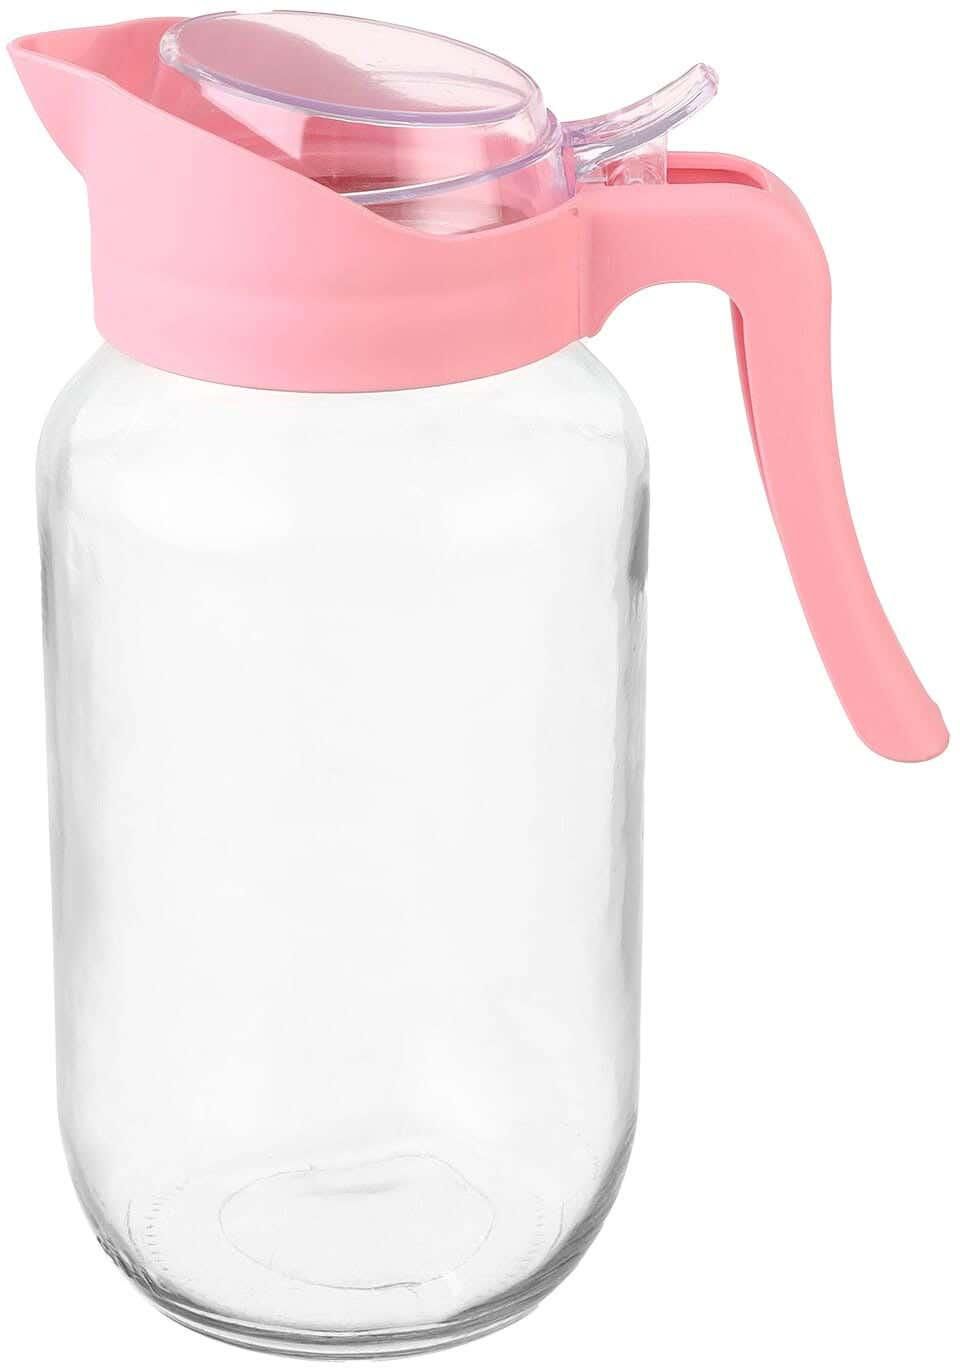 Get Elsedeq Glass Jug With Acrylic Lid, 1.5 Liters - Rose Clear with best offers | Raneen.com